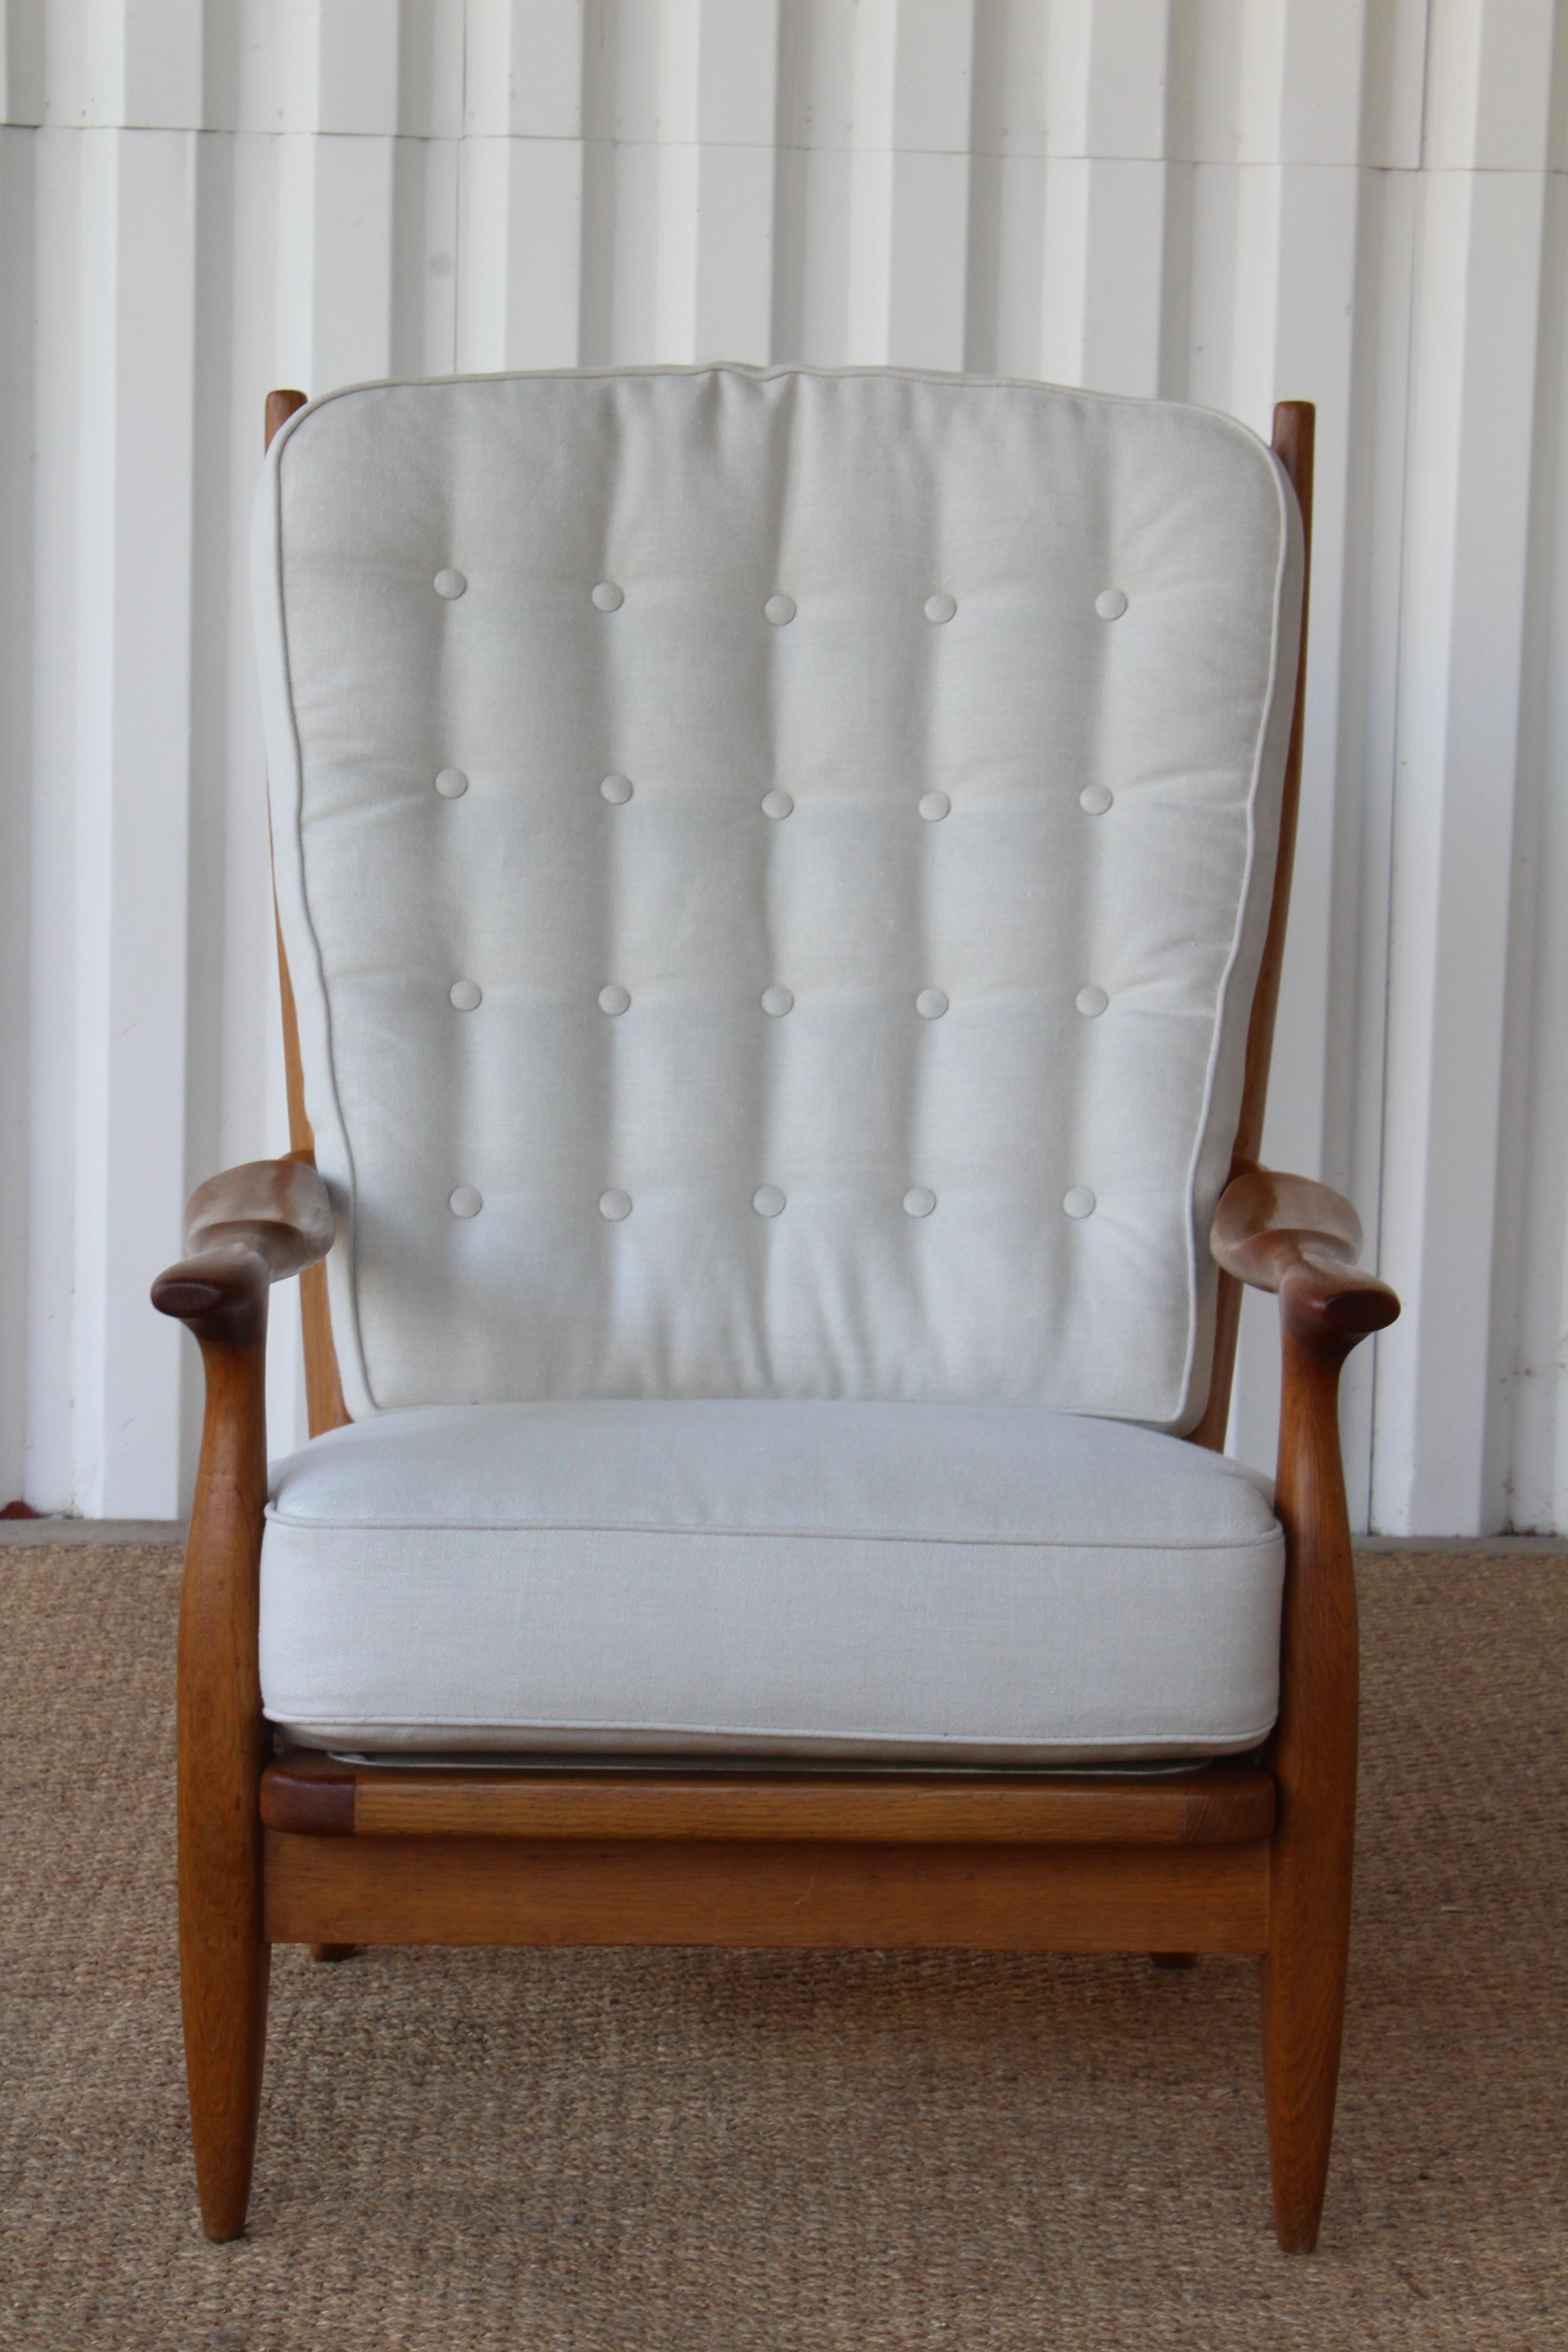 Vintage lounge chair designed by Guillerme et Chambron, France, 1960s. The solid oak frame has been refinished and completed with new cushions upholstered in an off-white Belgian linen. In overall excellent condition with new straps under the seat